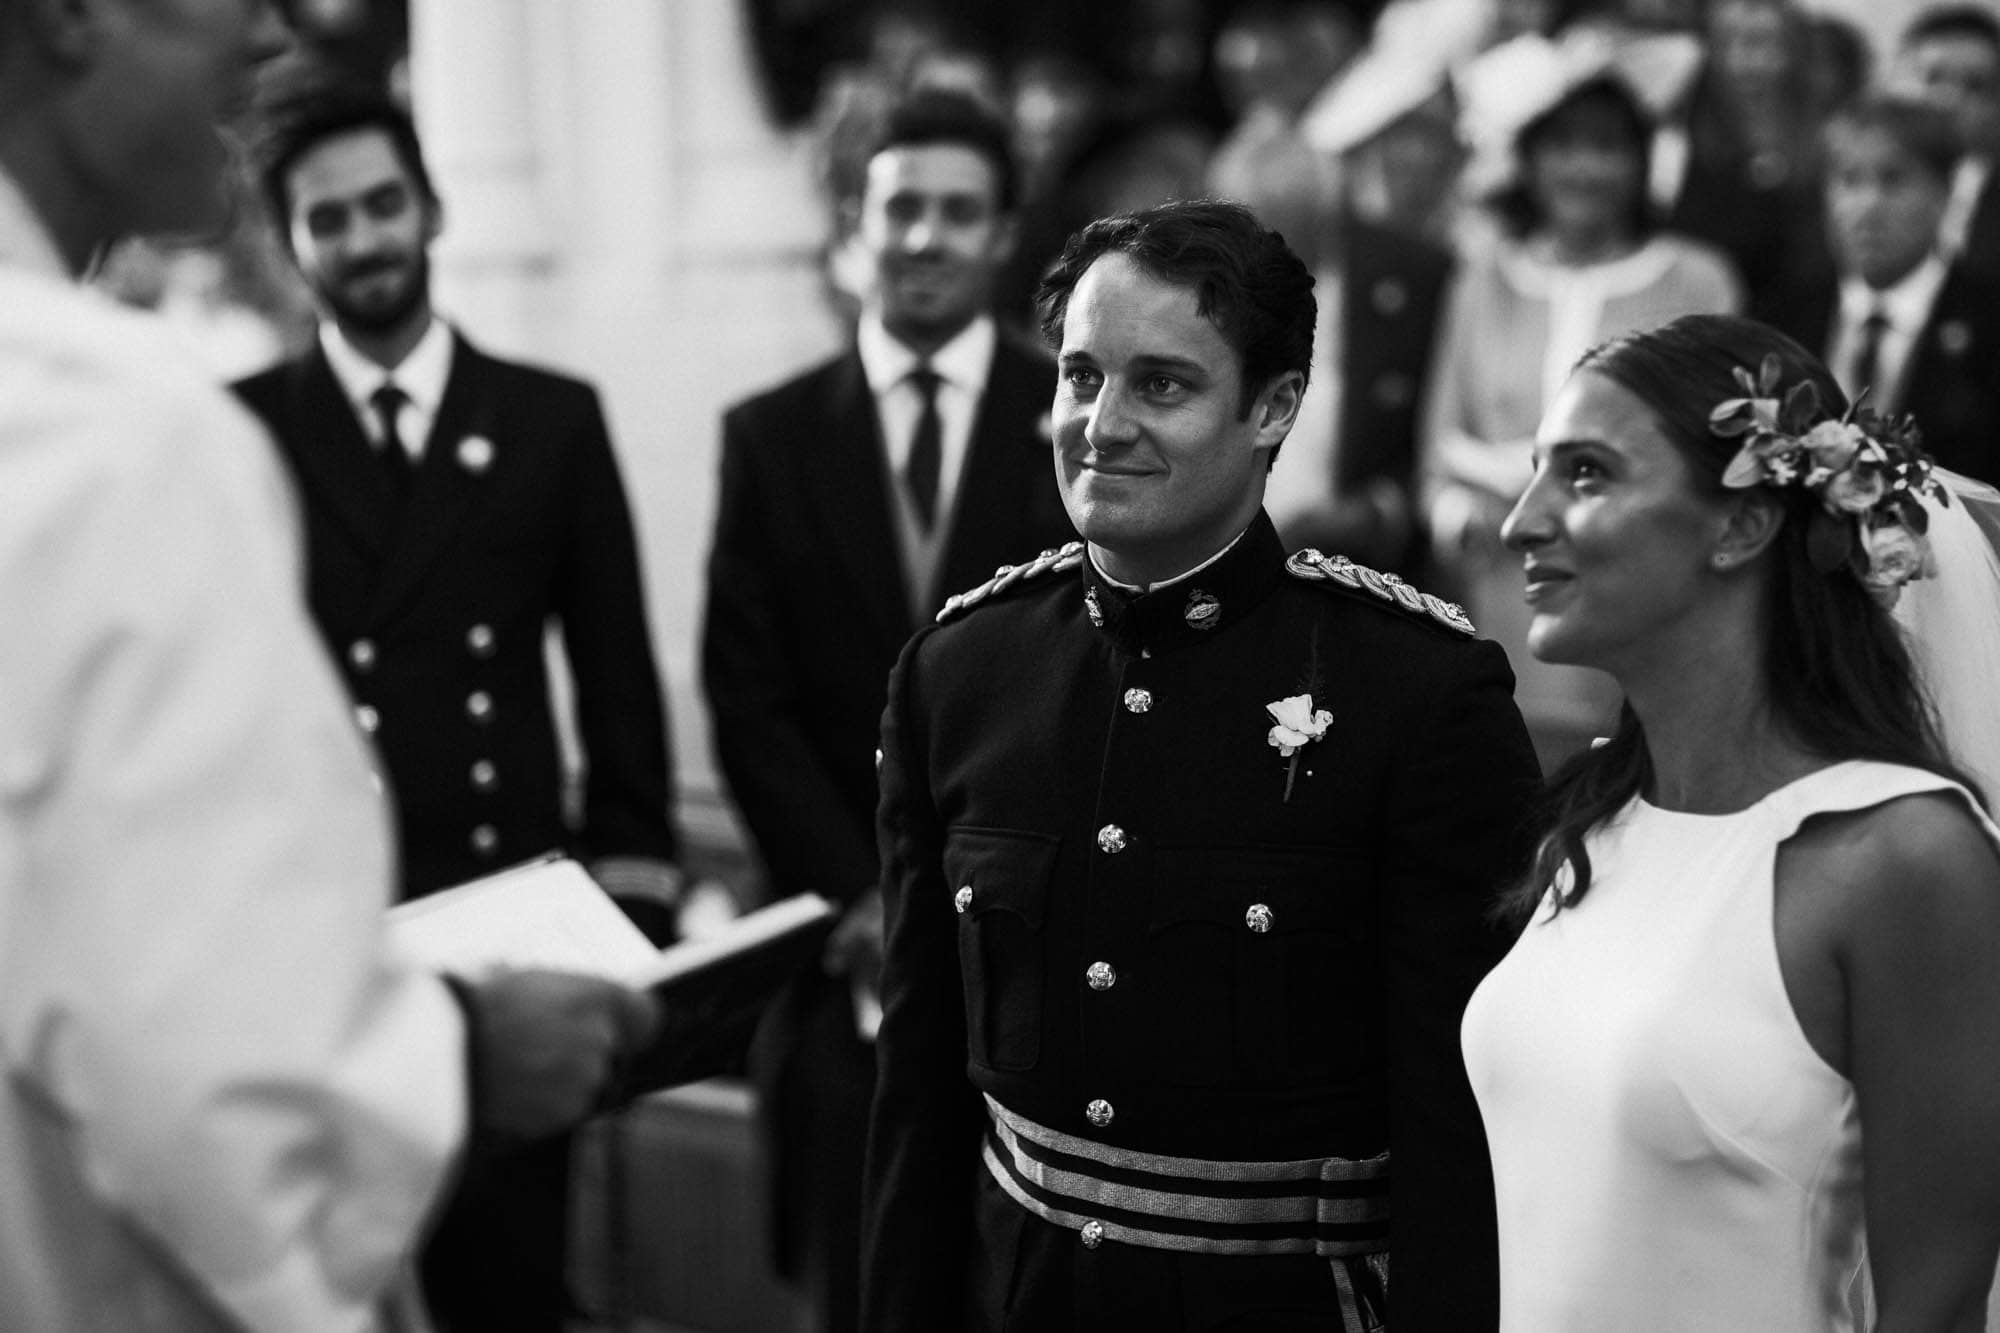 bride and groom smiling in black and white photograph